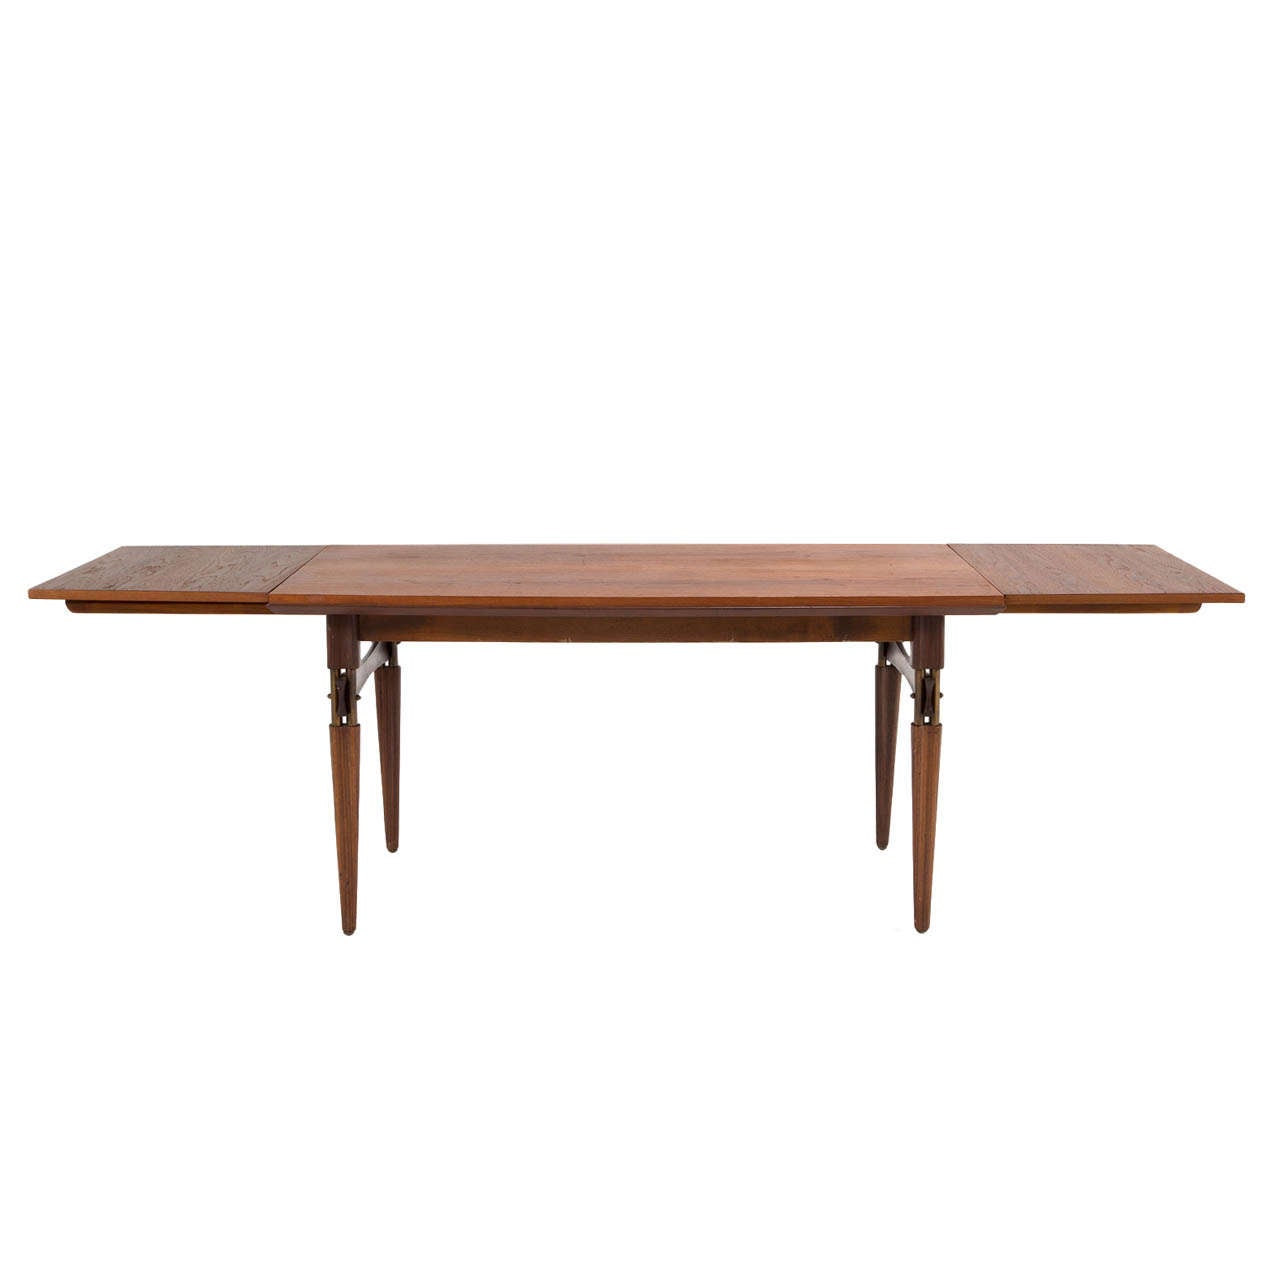 Refined Italian Teak Extendable Dining Table with Brass Accents